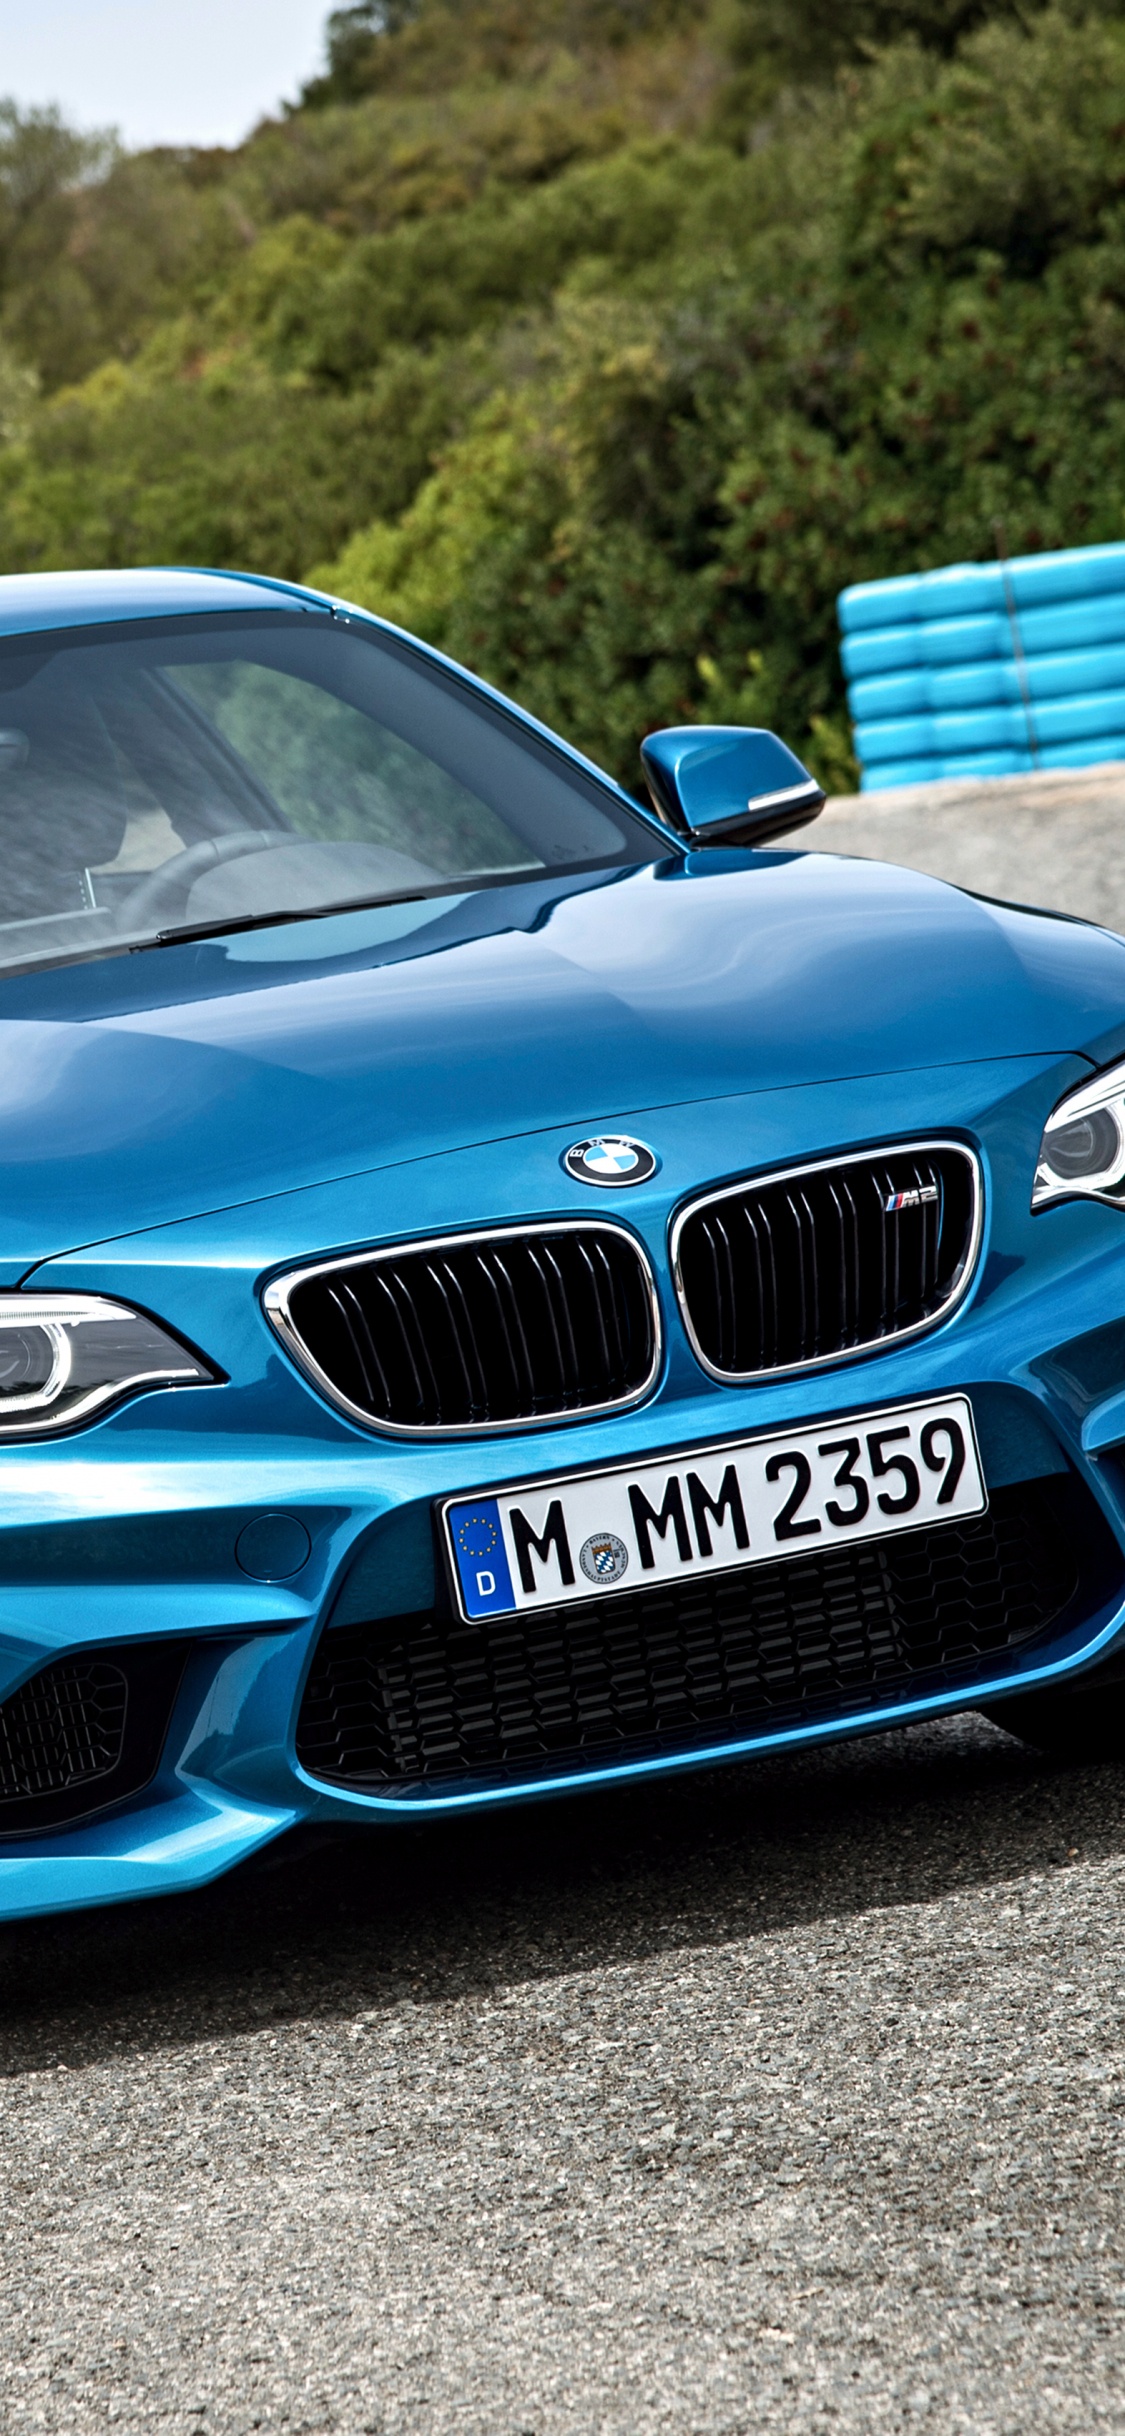 Blue Bmw m 3 on Road During Daytime. Wallpaper in 1125x2436 Resolution